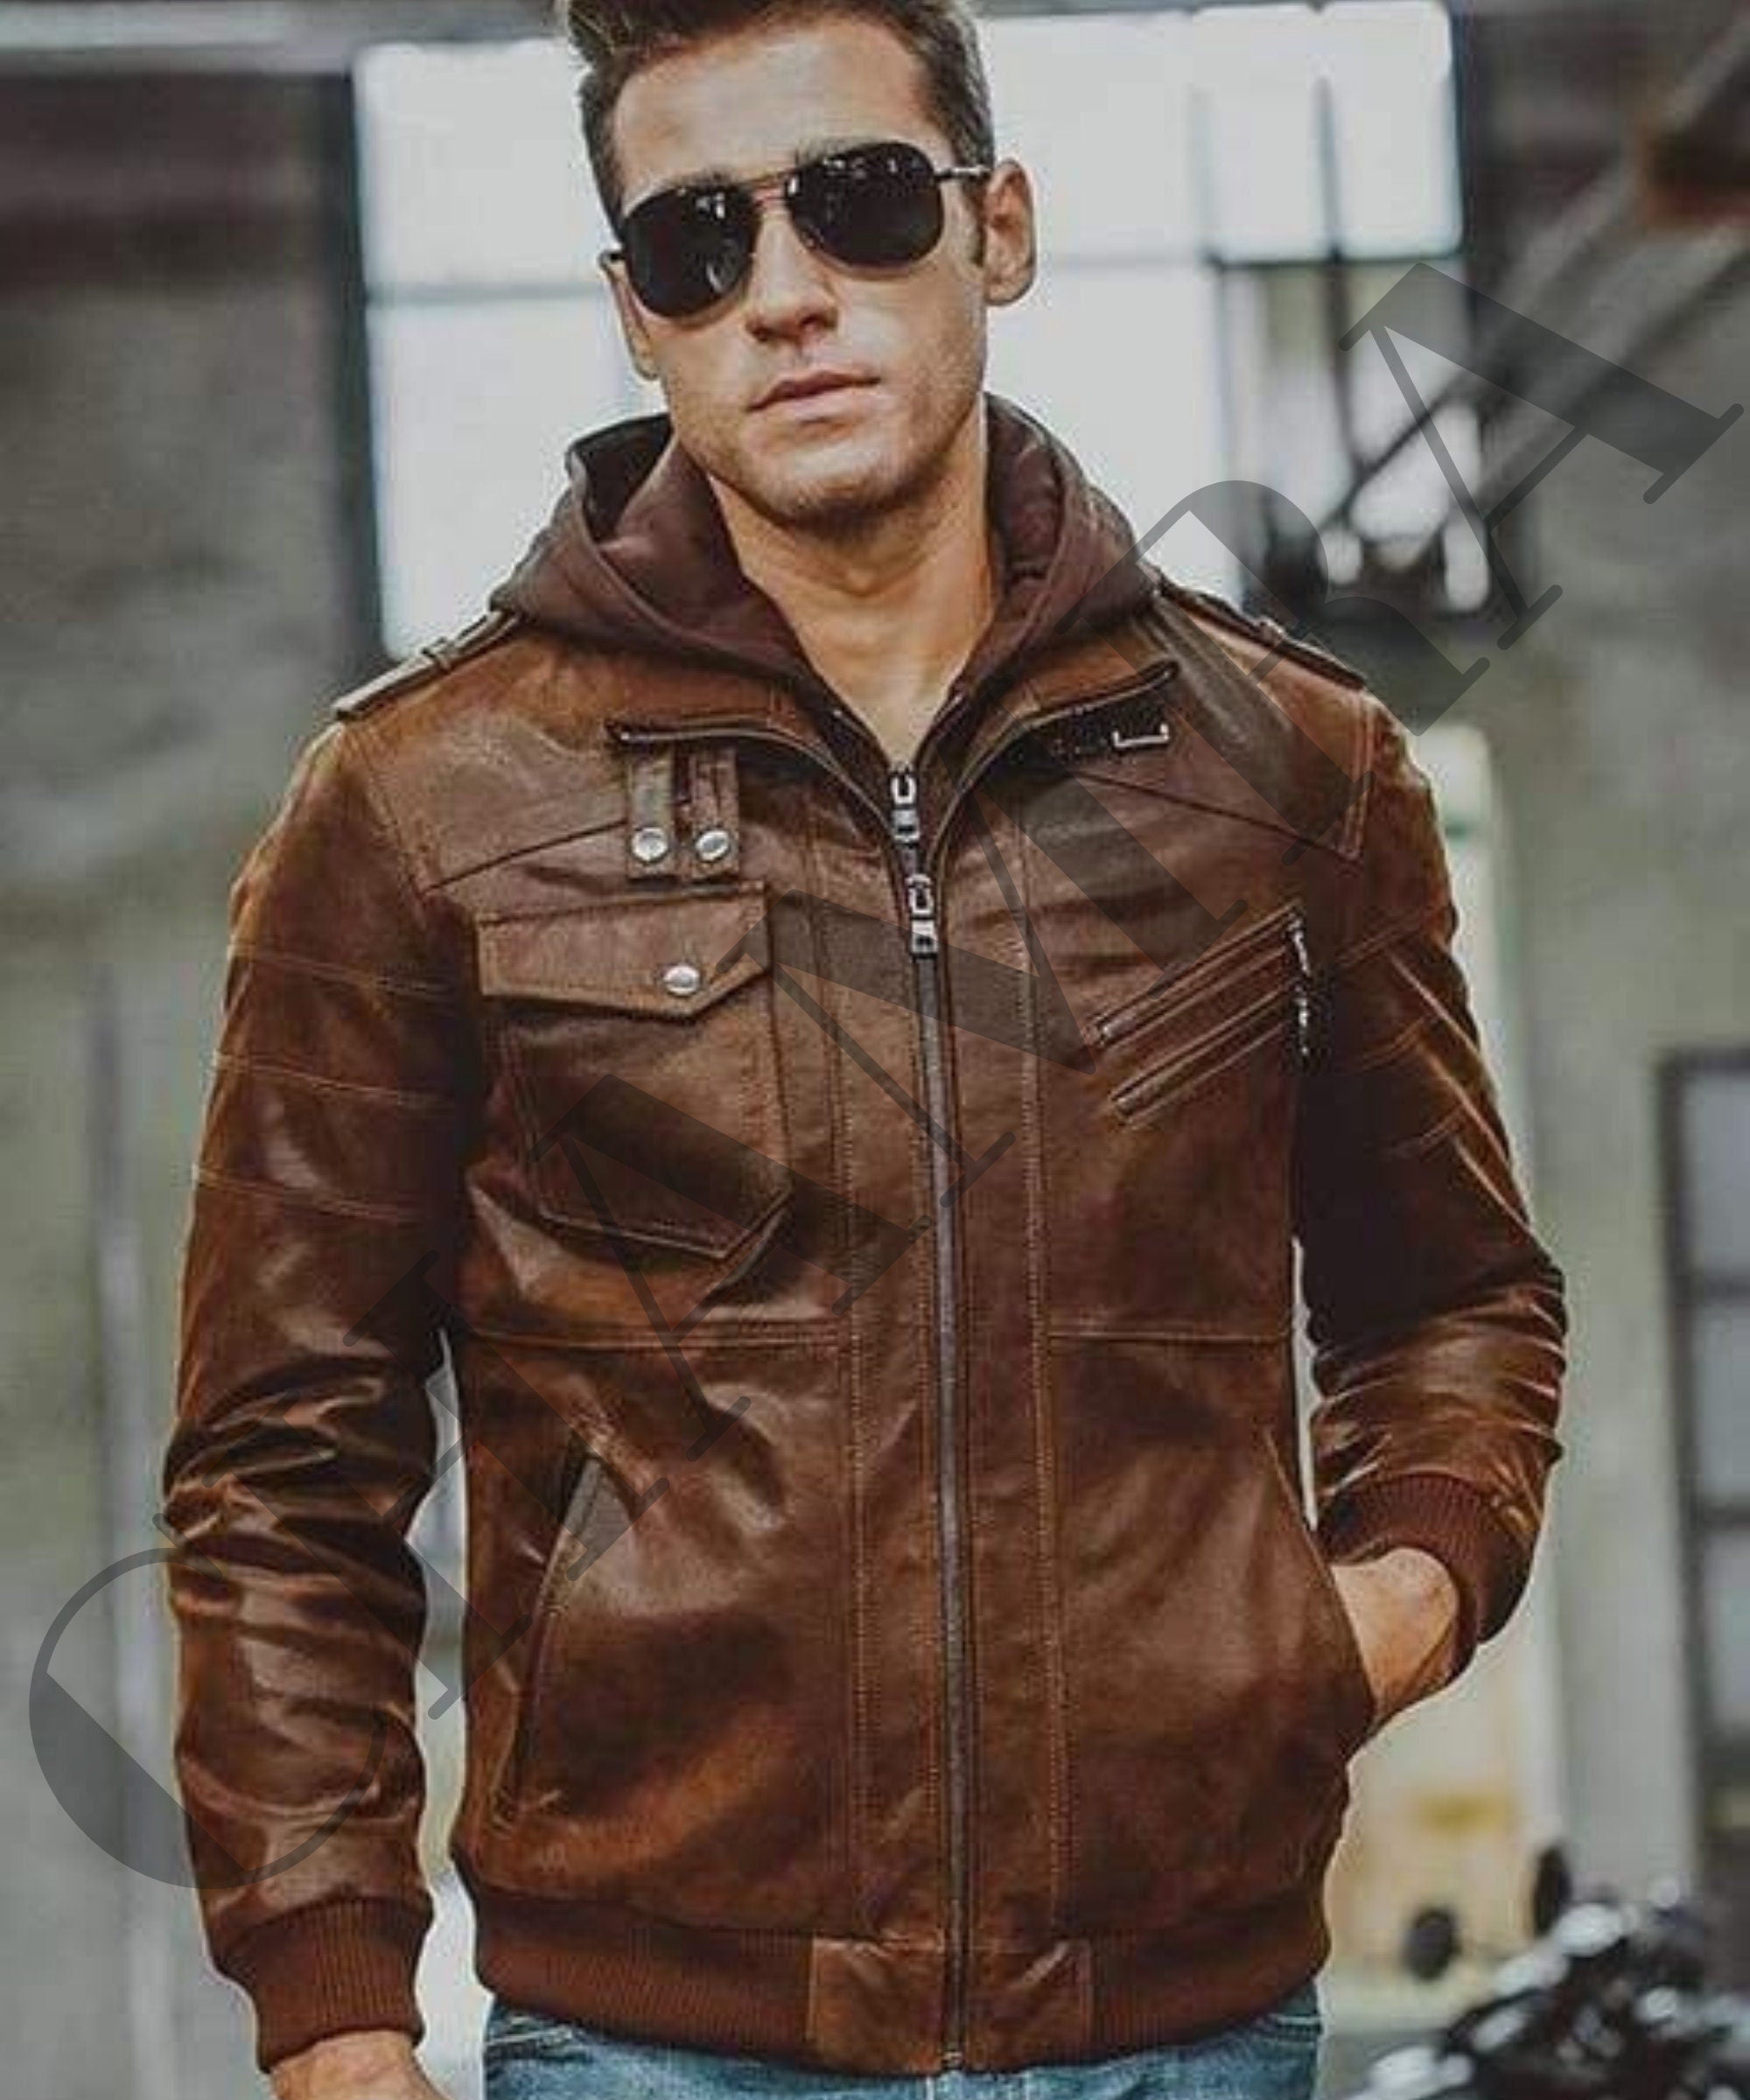 AMERICAN NAVY A4 SHEEPSKIN LEATHER JACKET - MIL-TEC | Apparel \ Jackets \  Cold Weather Jackets militarysurplus.eu | Army Navy Surplus - Tactical |  Big variety - Cheap prices | Military Surplus,